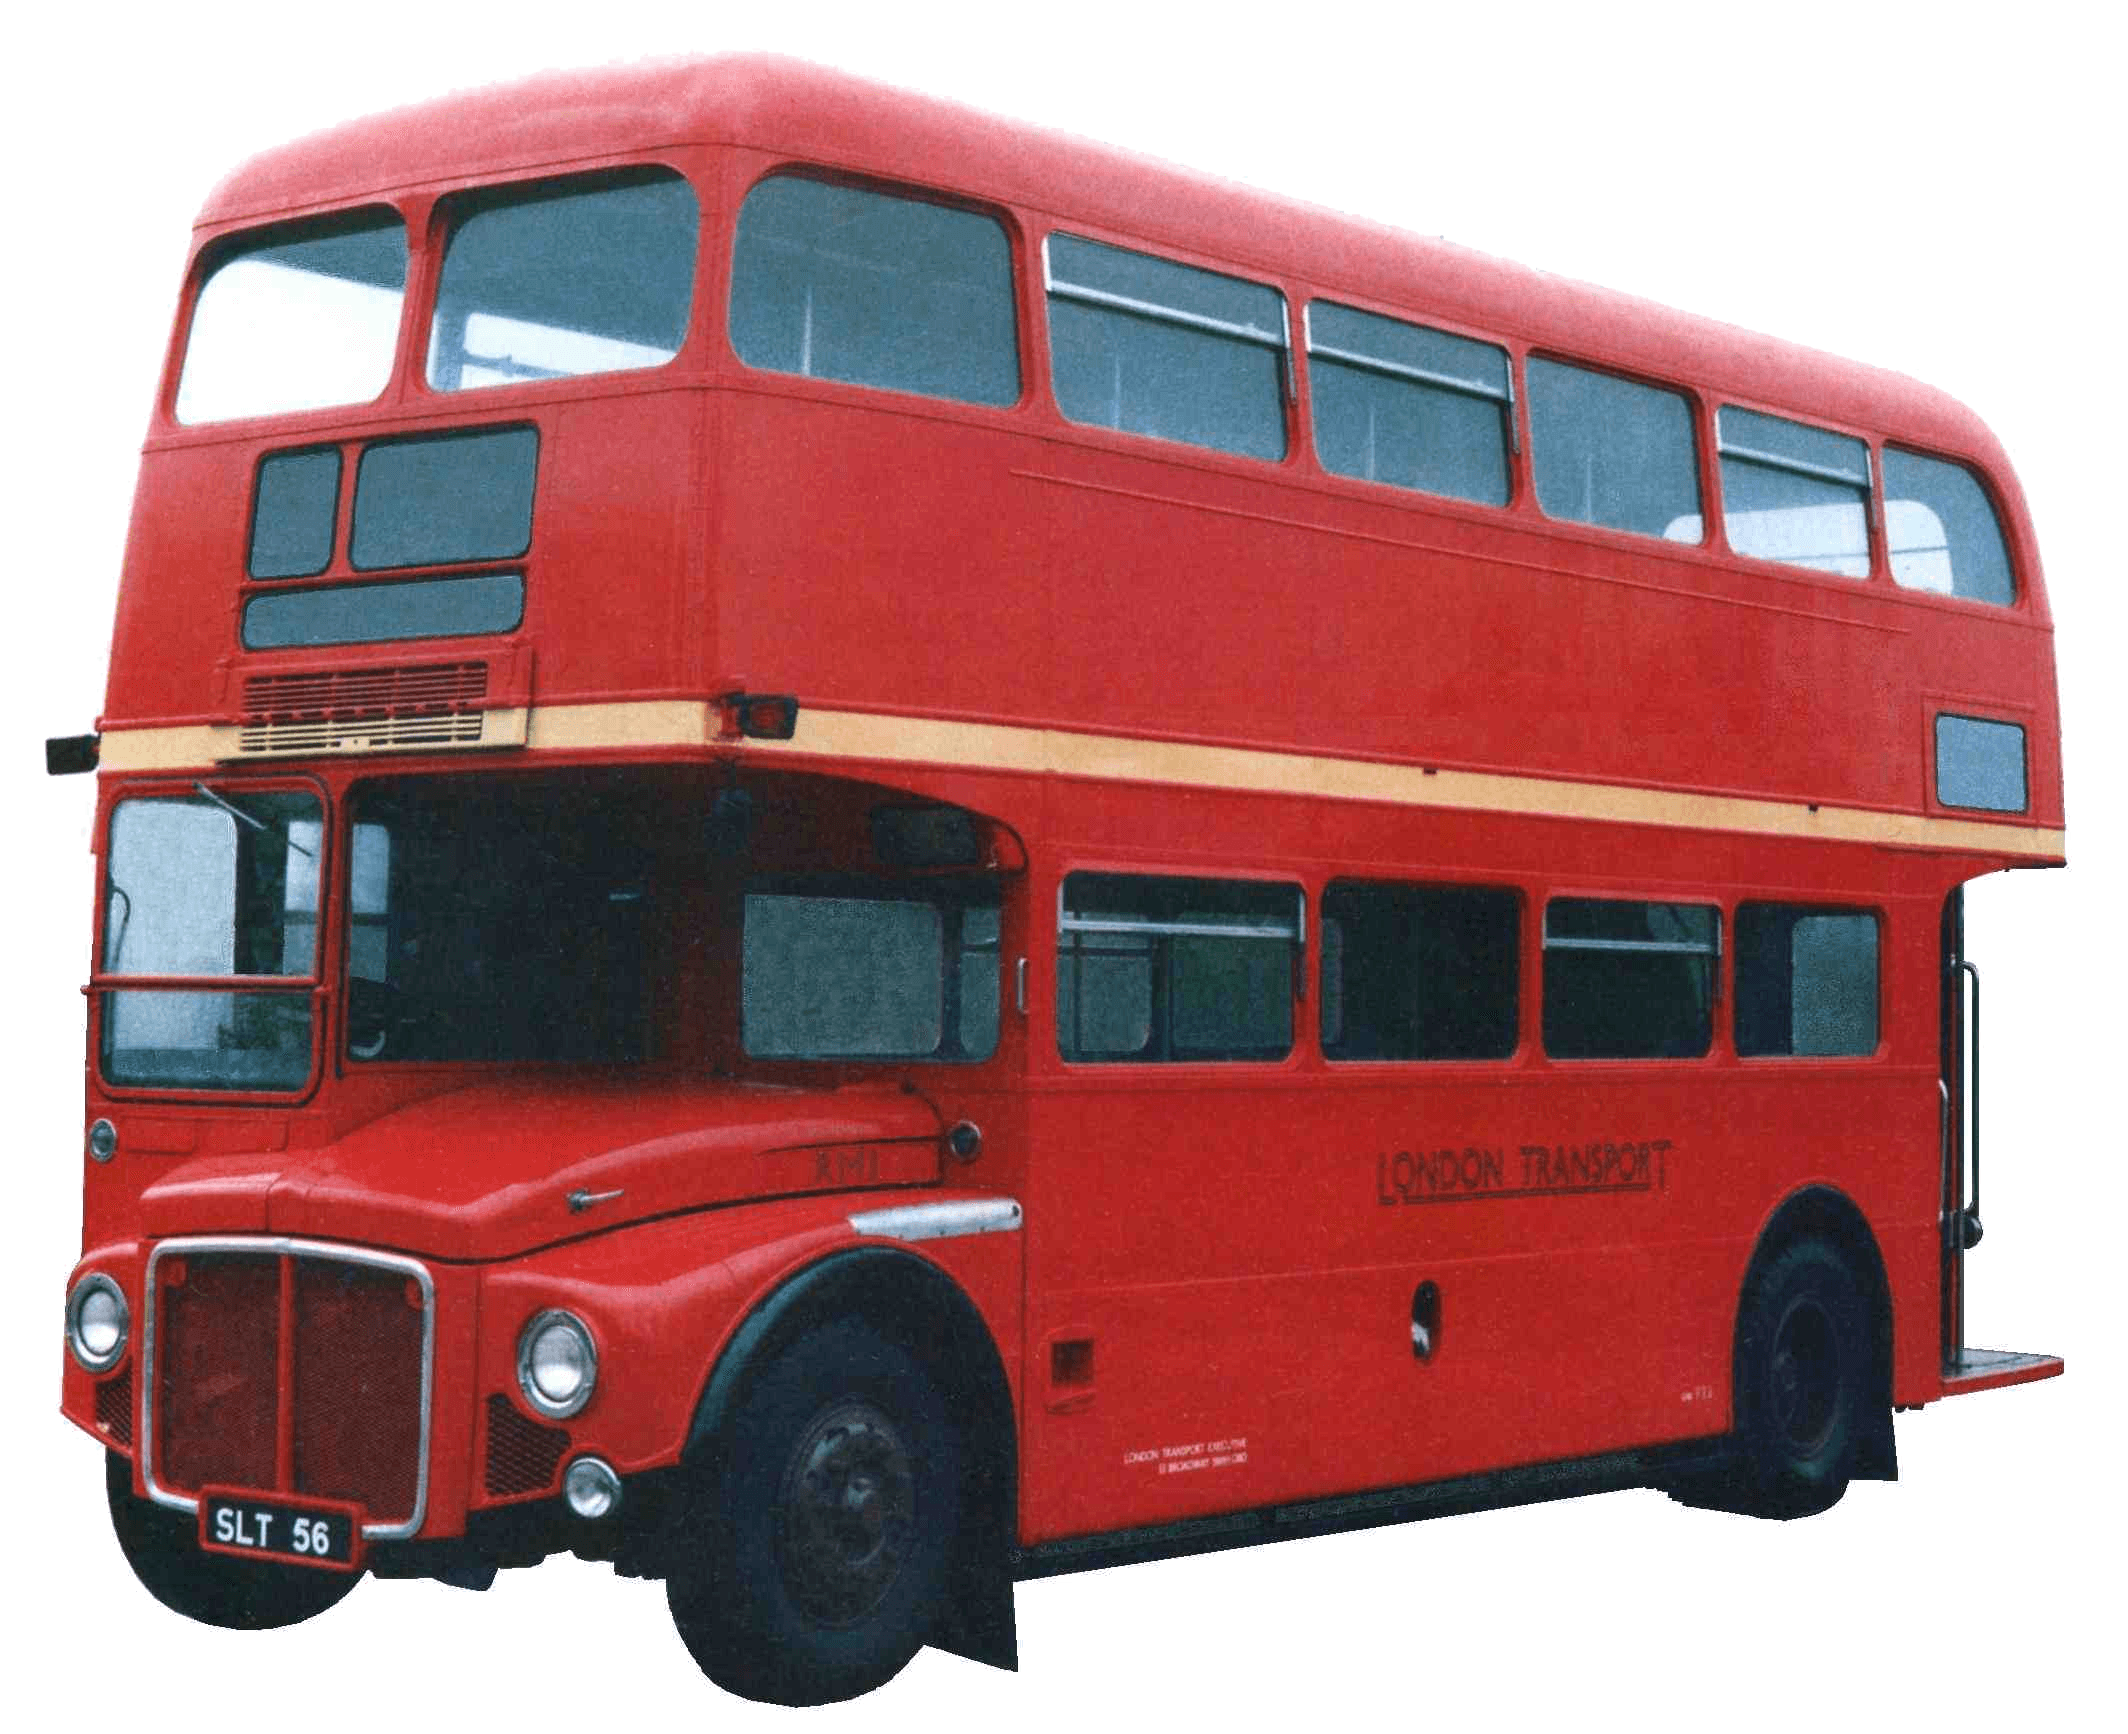 A 2 floor red bus